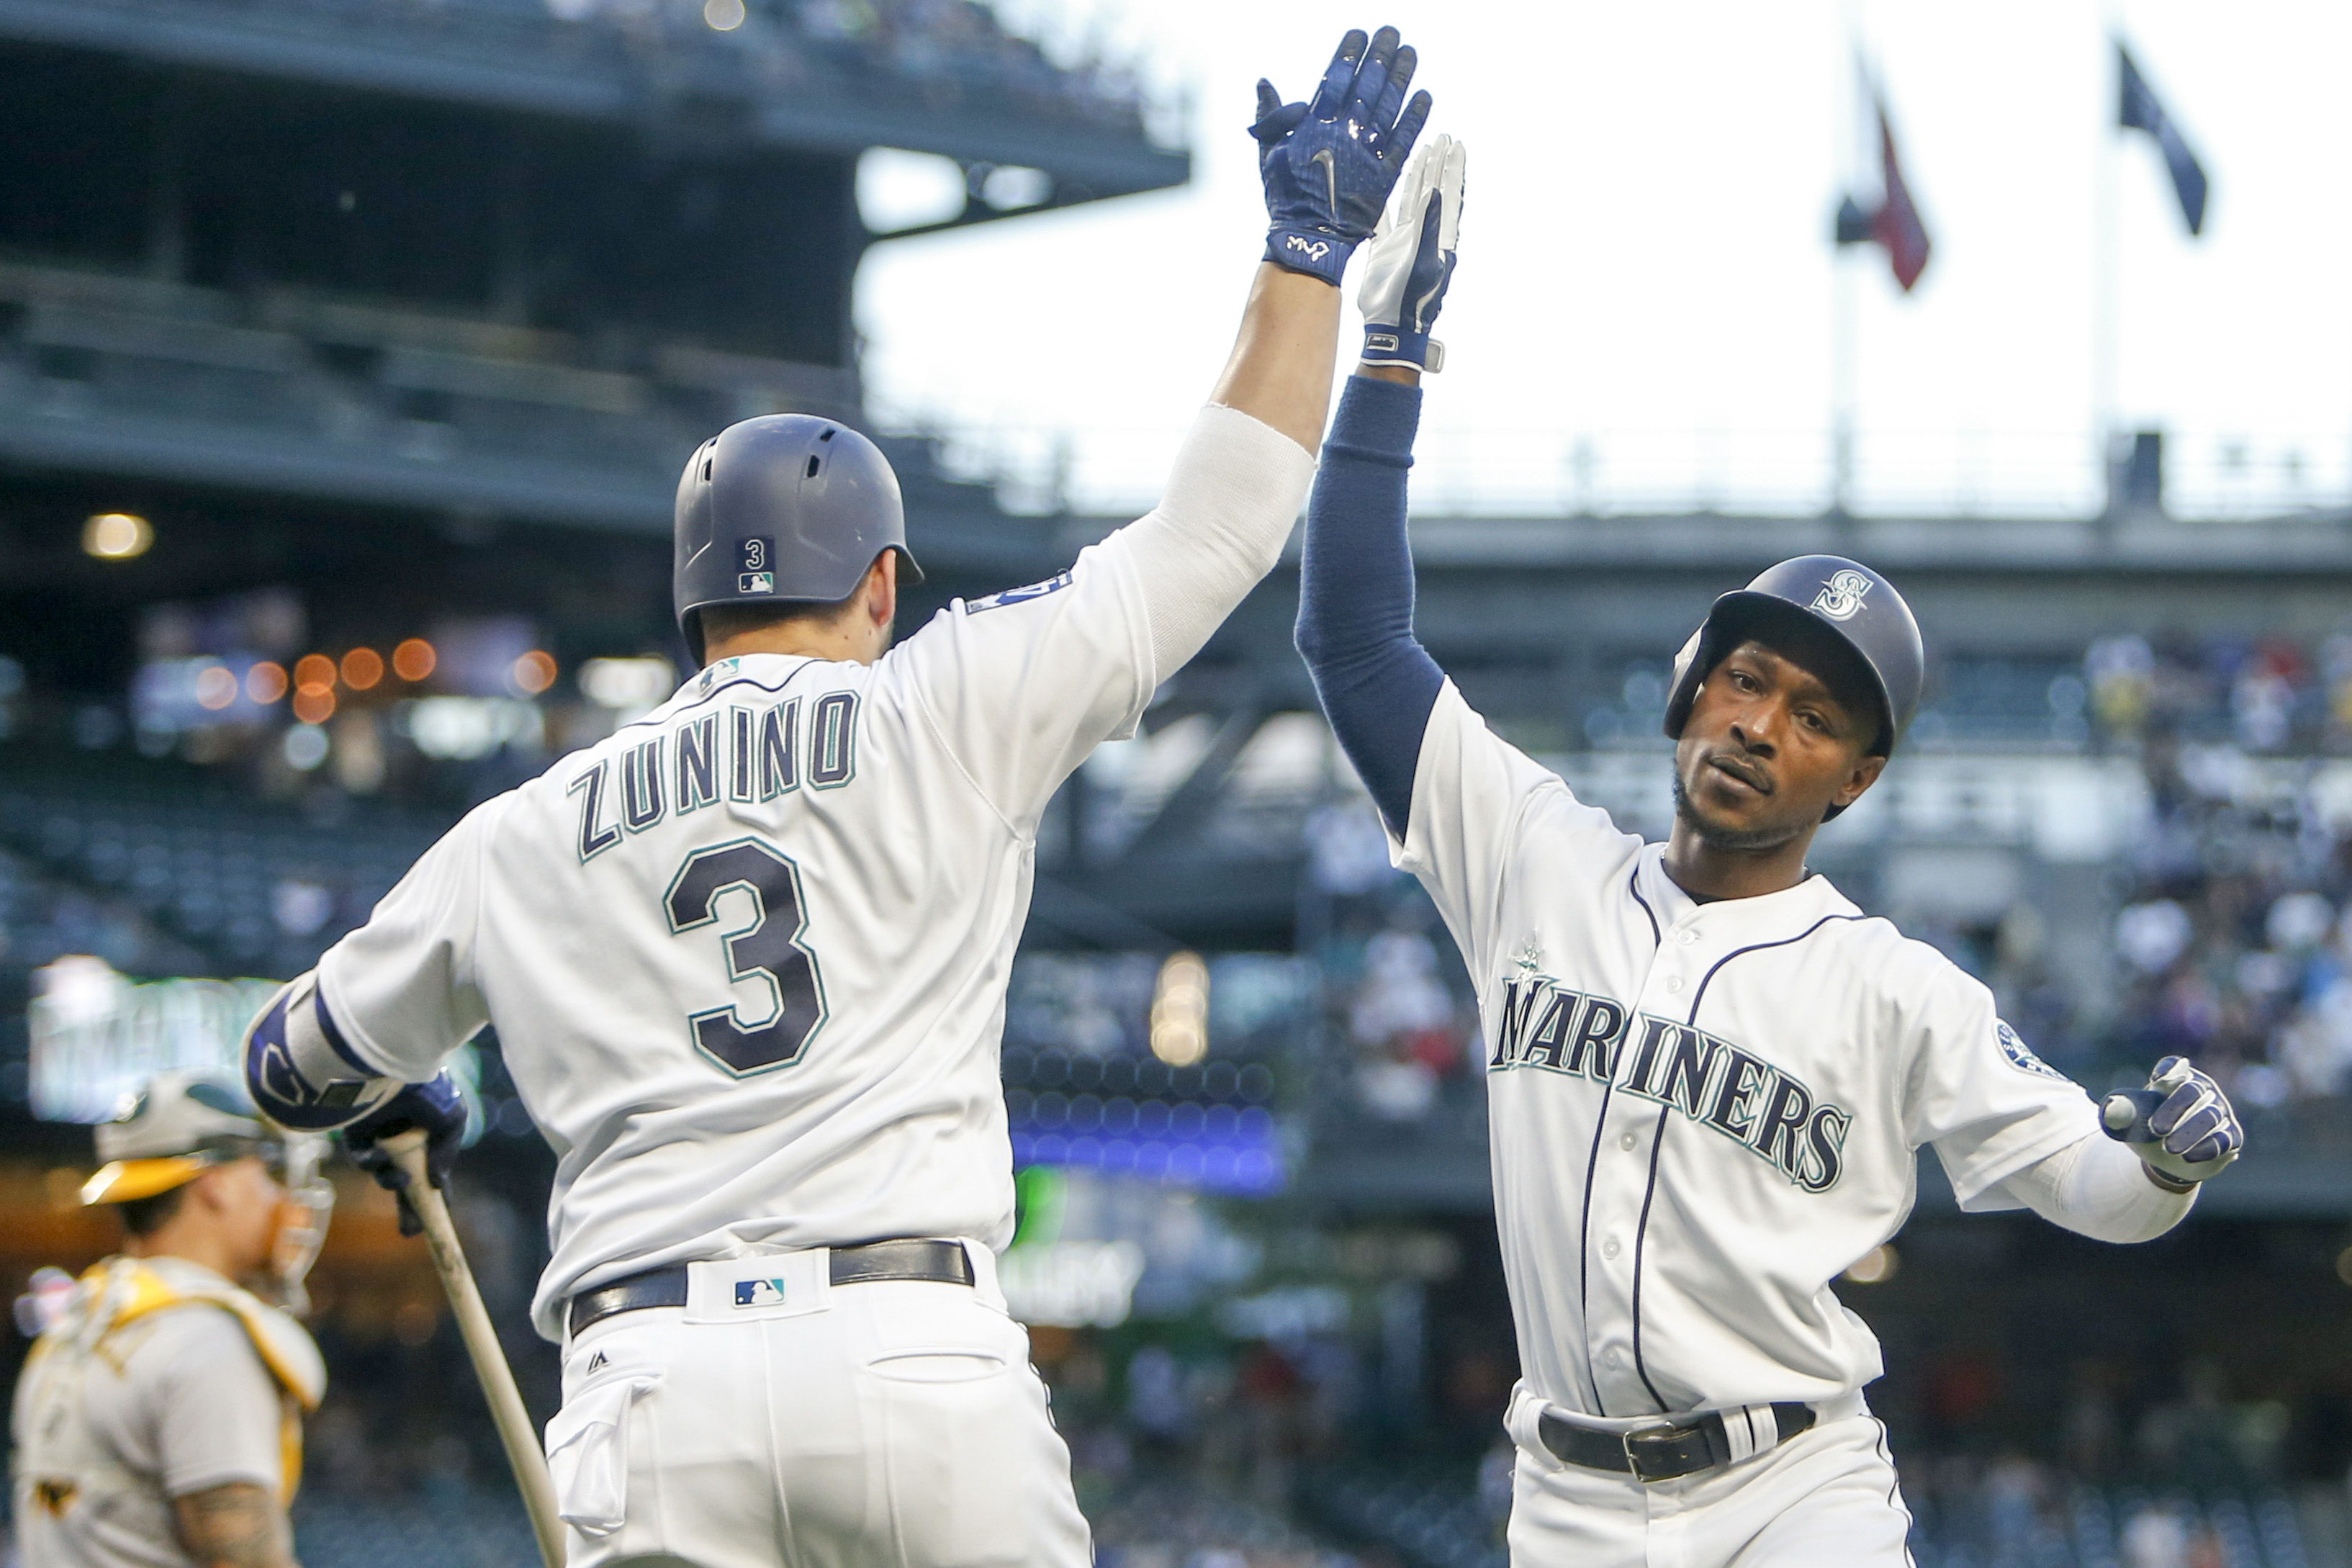 Jul 8, 2017; Seattle, WA, USA; Seattle Mariners center fielder Jarrod Dyson (1) high fives catcher Mike Zunino (3) after hitting a solo home run against the Oakland Athletics during the fifth inning at Safeco Field. Mandatory Credit: Joe Nicholson-USA TODAY Sports